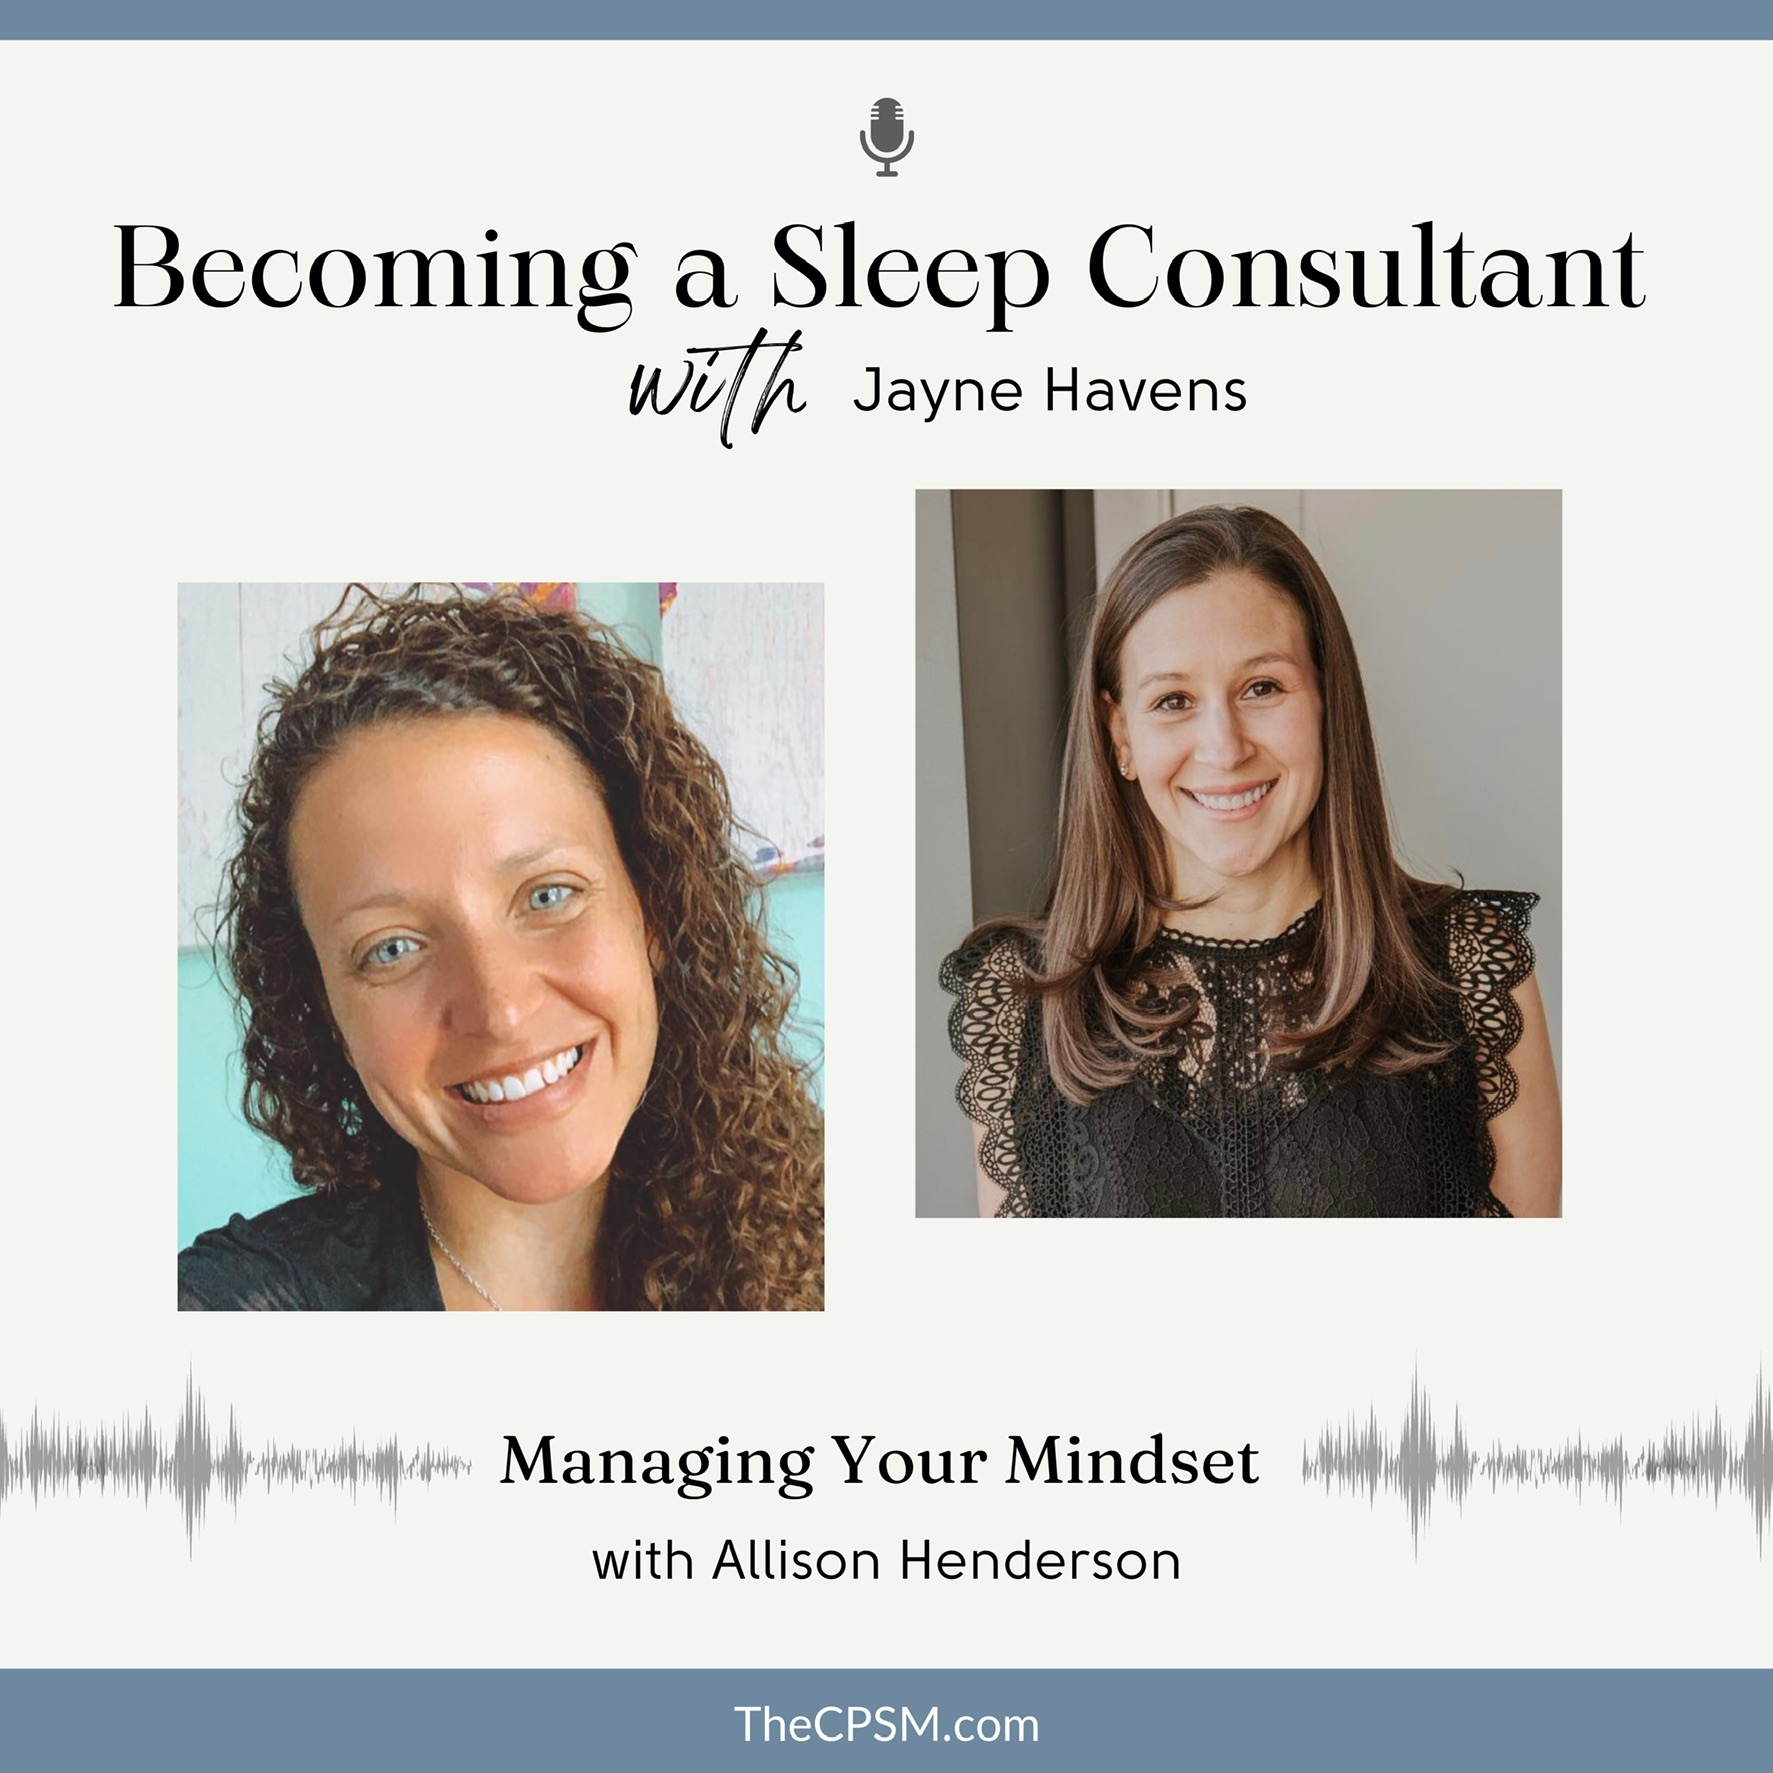 Managing your Mindset with Allison Henderson